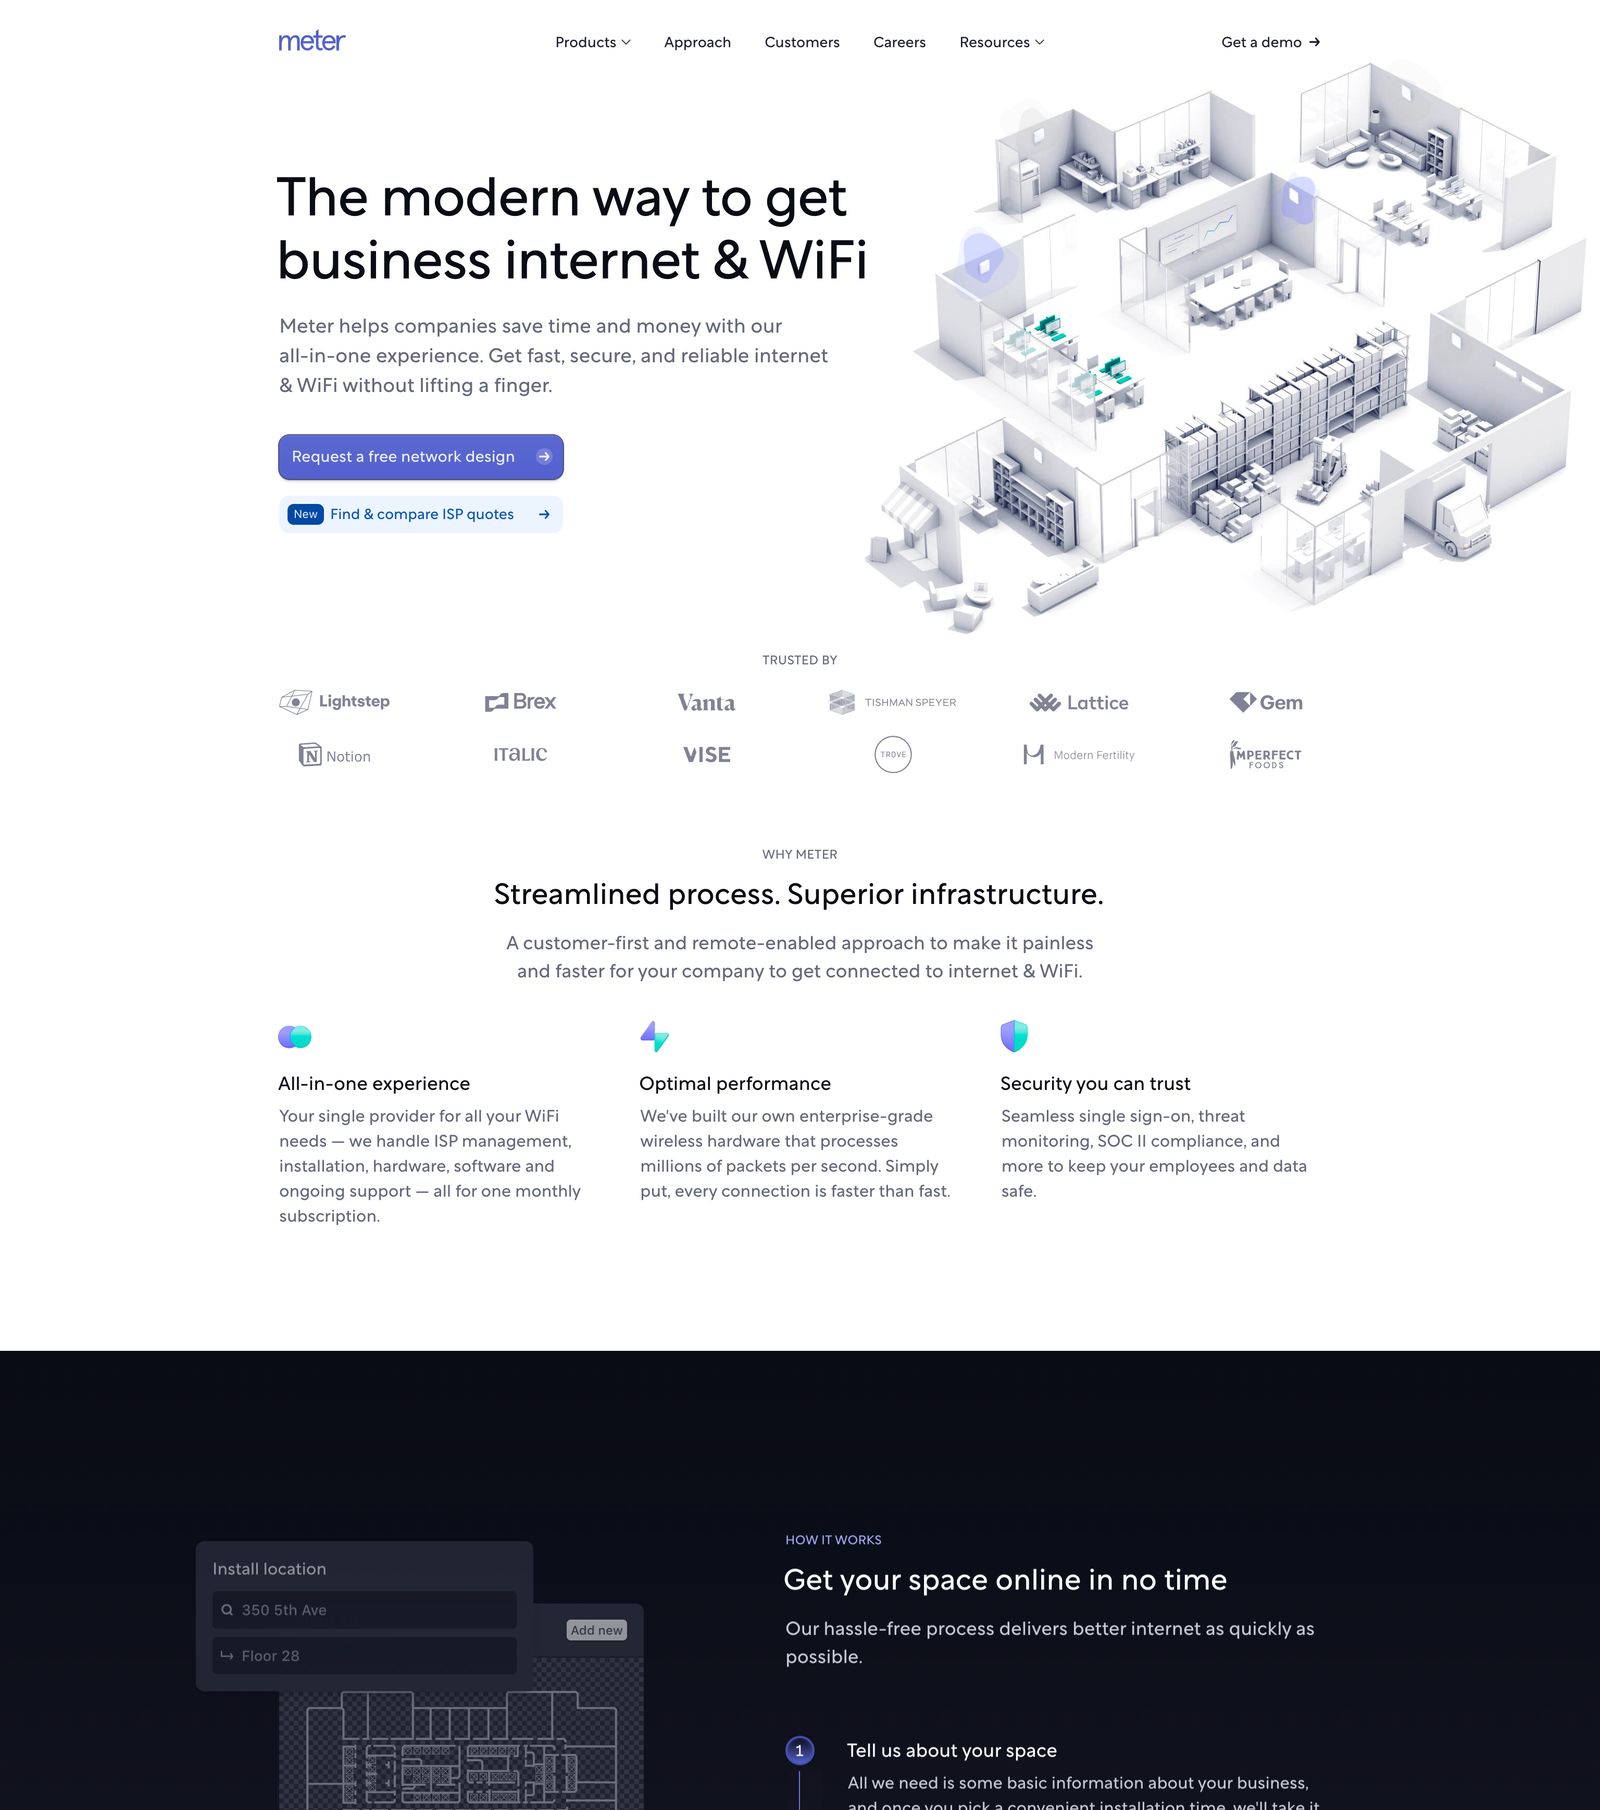 /articles/landing-page-inspiration/landing-page-design-example-12.jpg)_Saas Landing page example from Meter